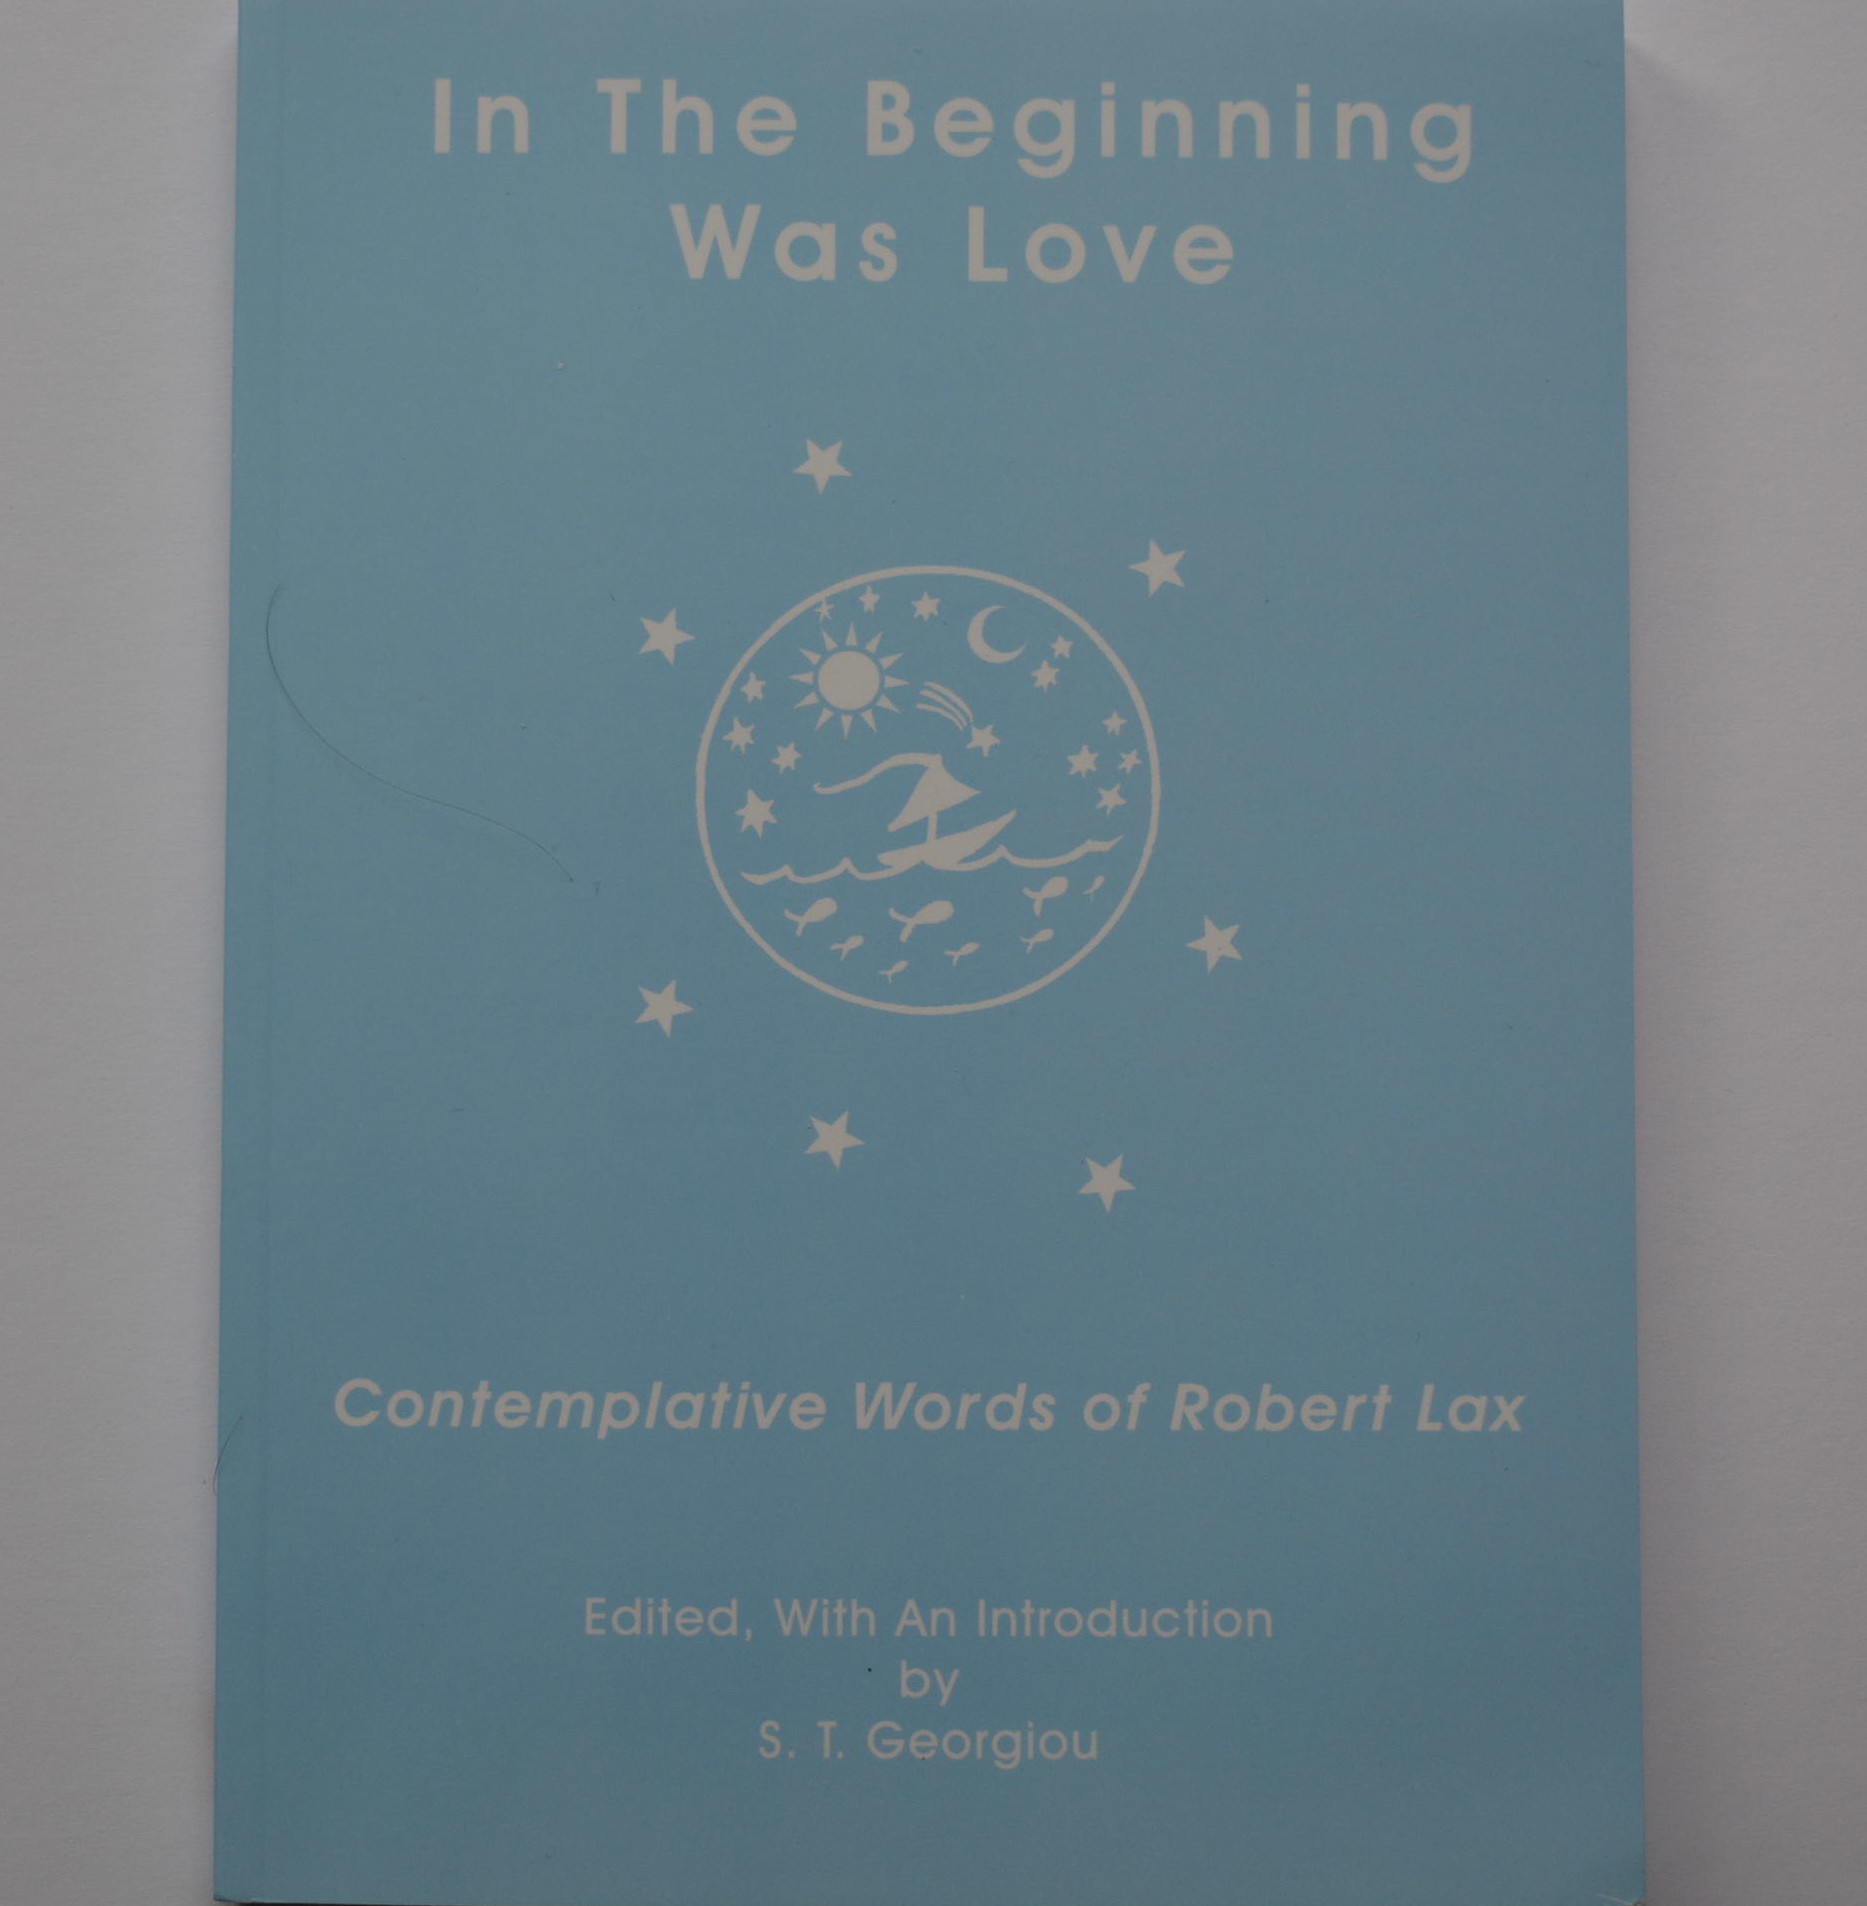 A New Book of Lax’s Contemplative Writings, edited by S. T. Georgiou